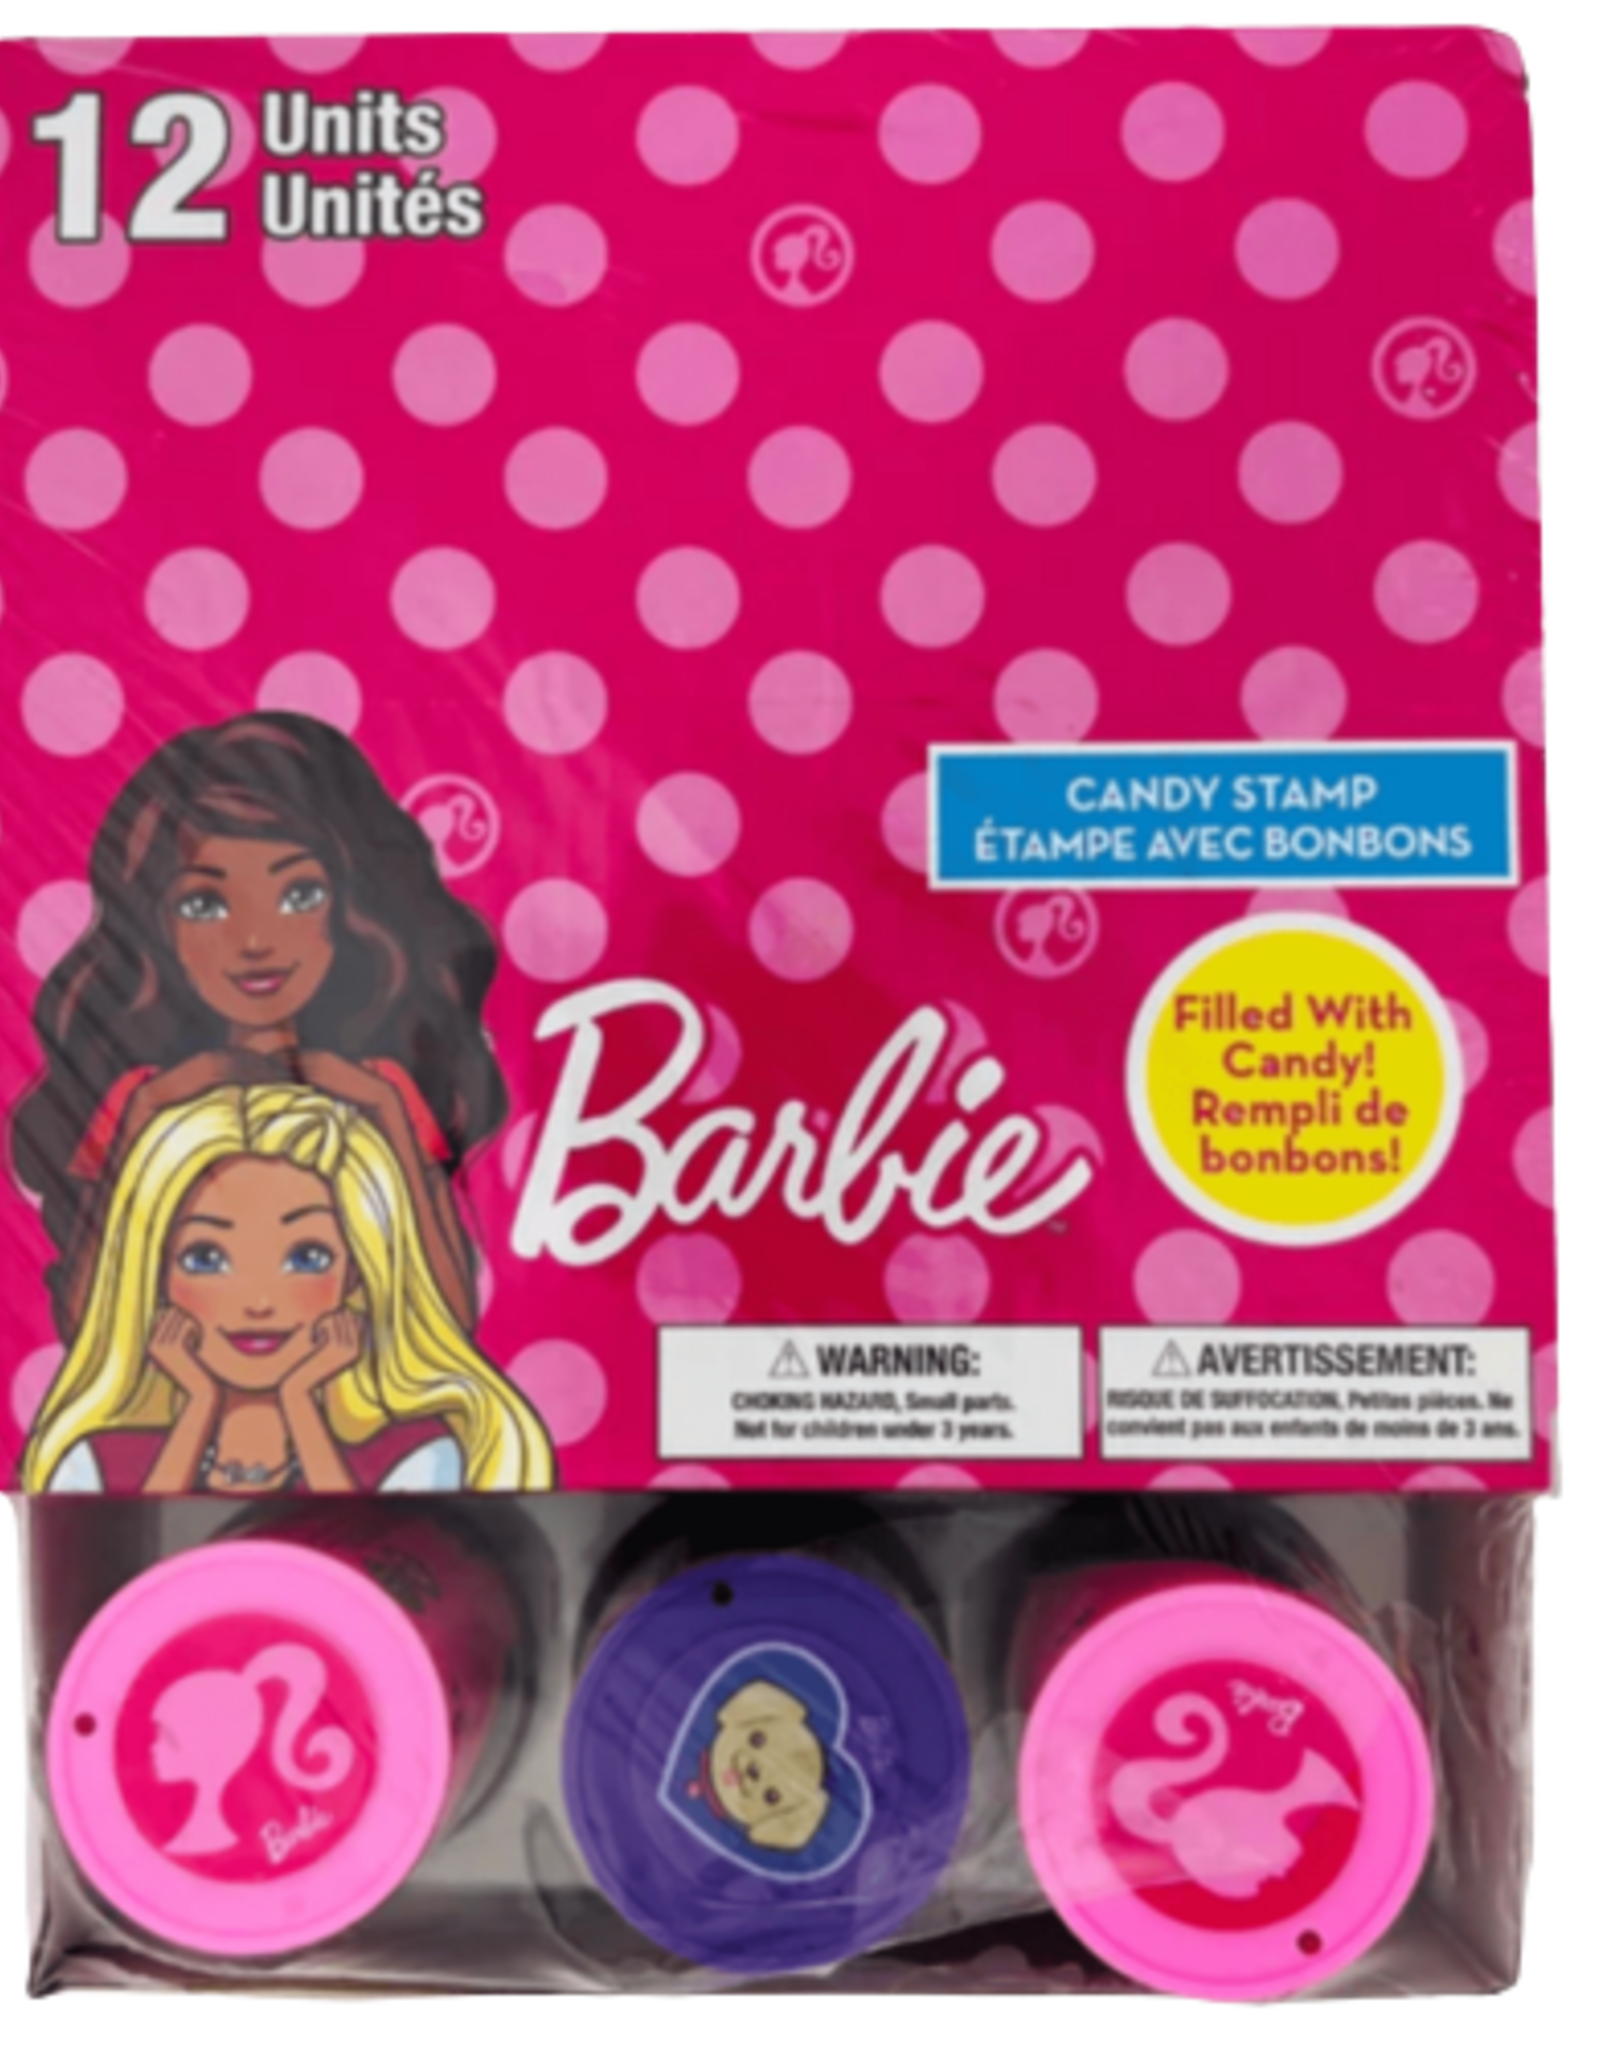 Exclusive Brands Barbie Candy Stamp